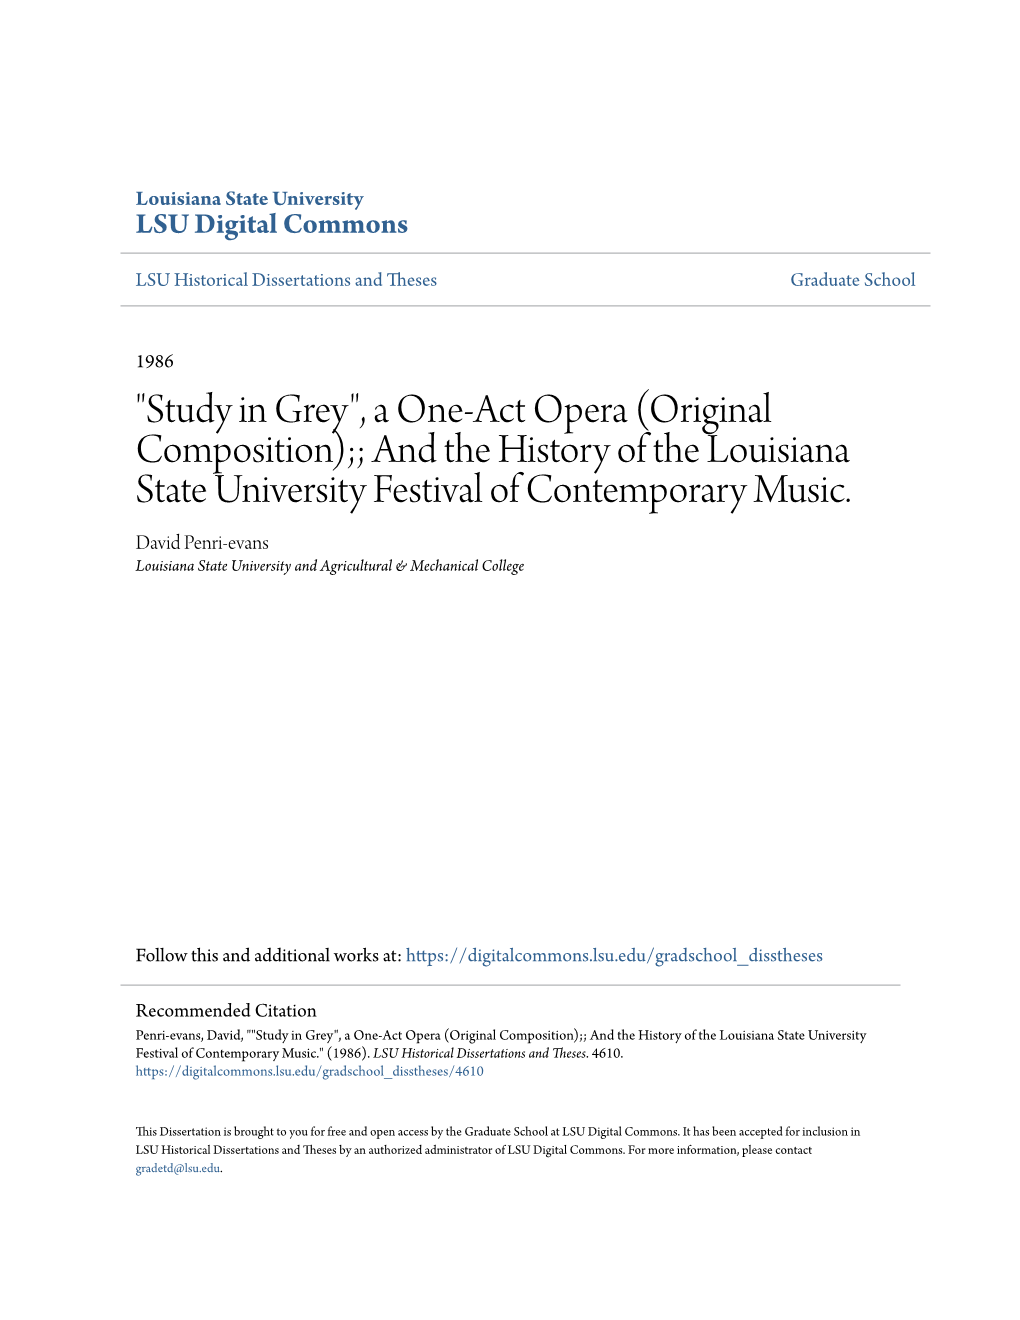 Original Composition);; and the History of the Louisiana State University Festival of Contemporary Music